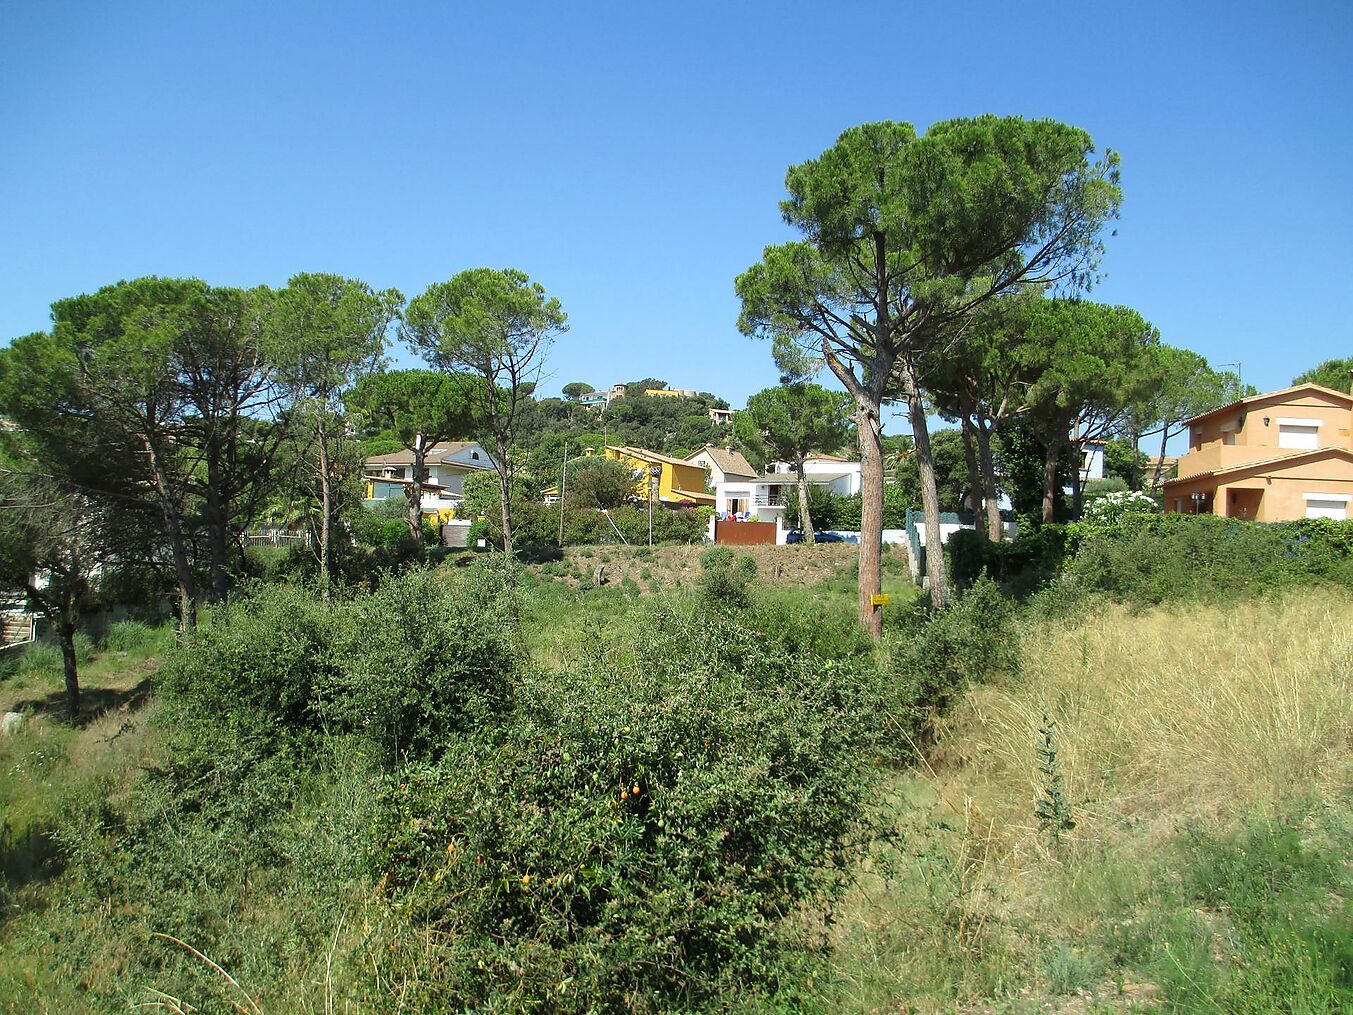 Plot of land in a lovely residential urbanisation between Playa de Aro and Calonge